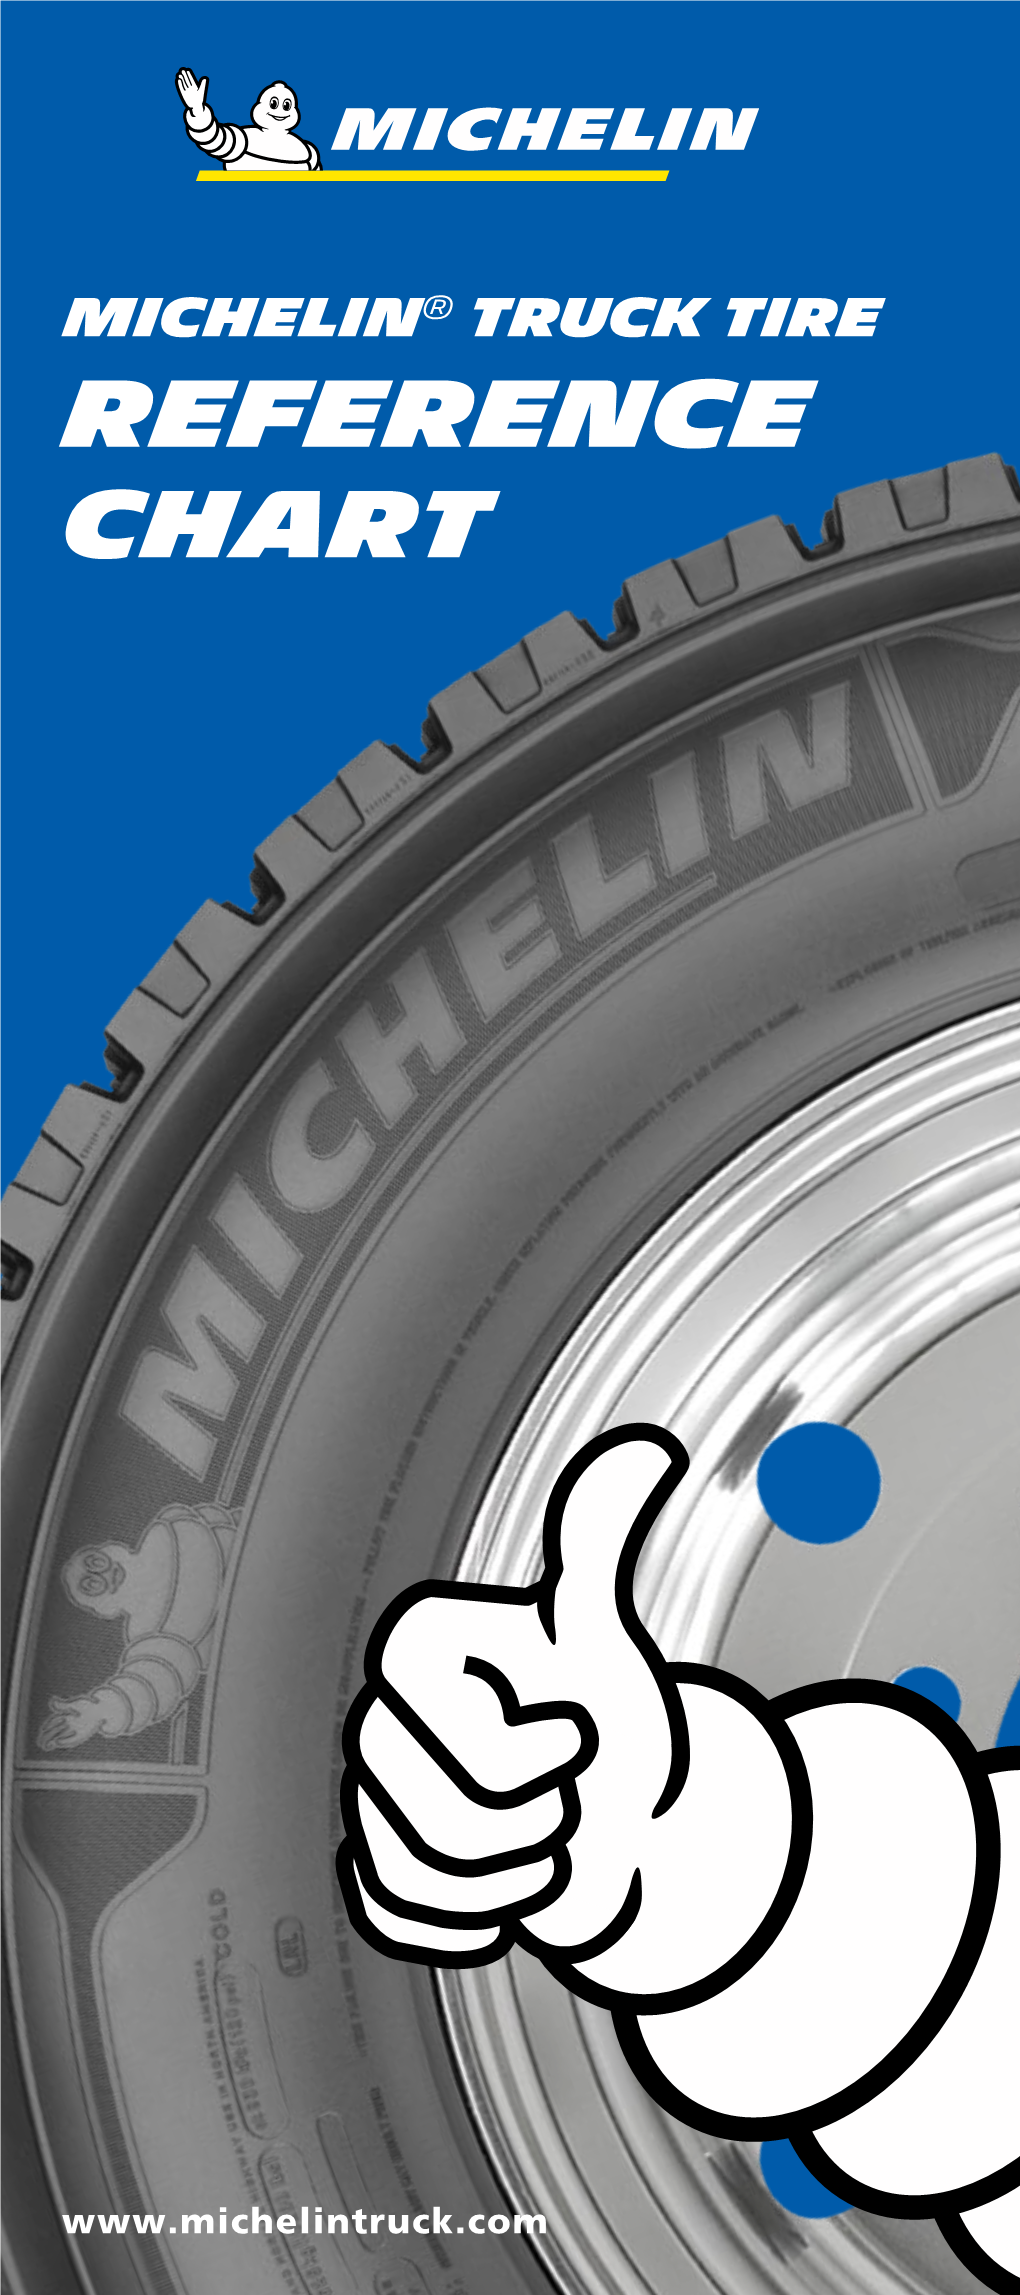 Michelin® Truck Tire Reference Chart